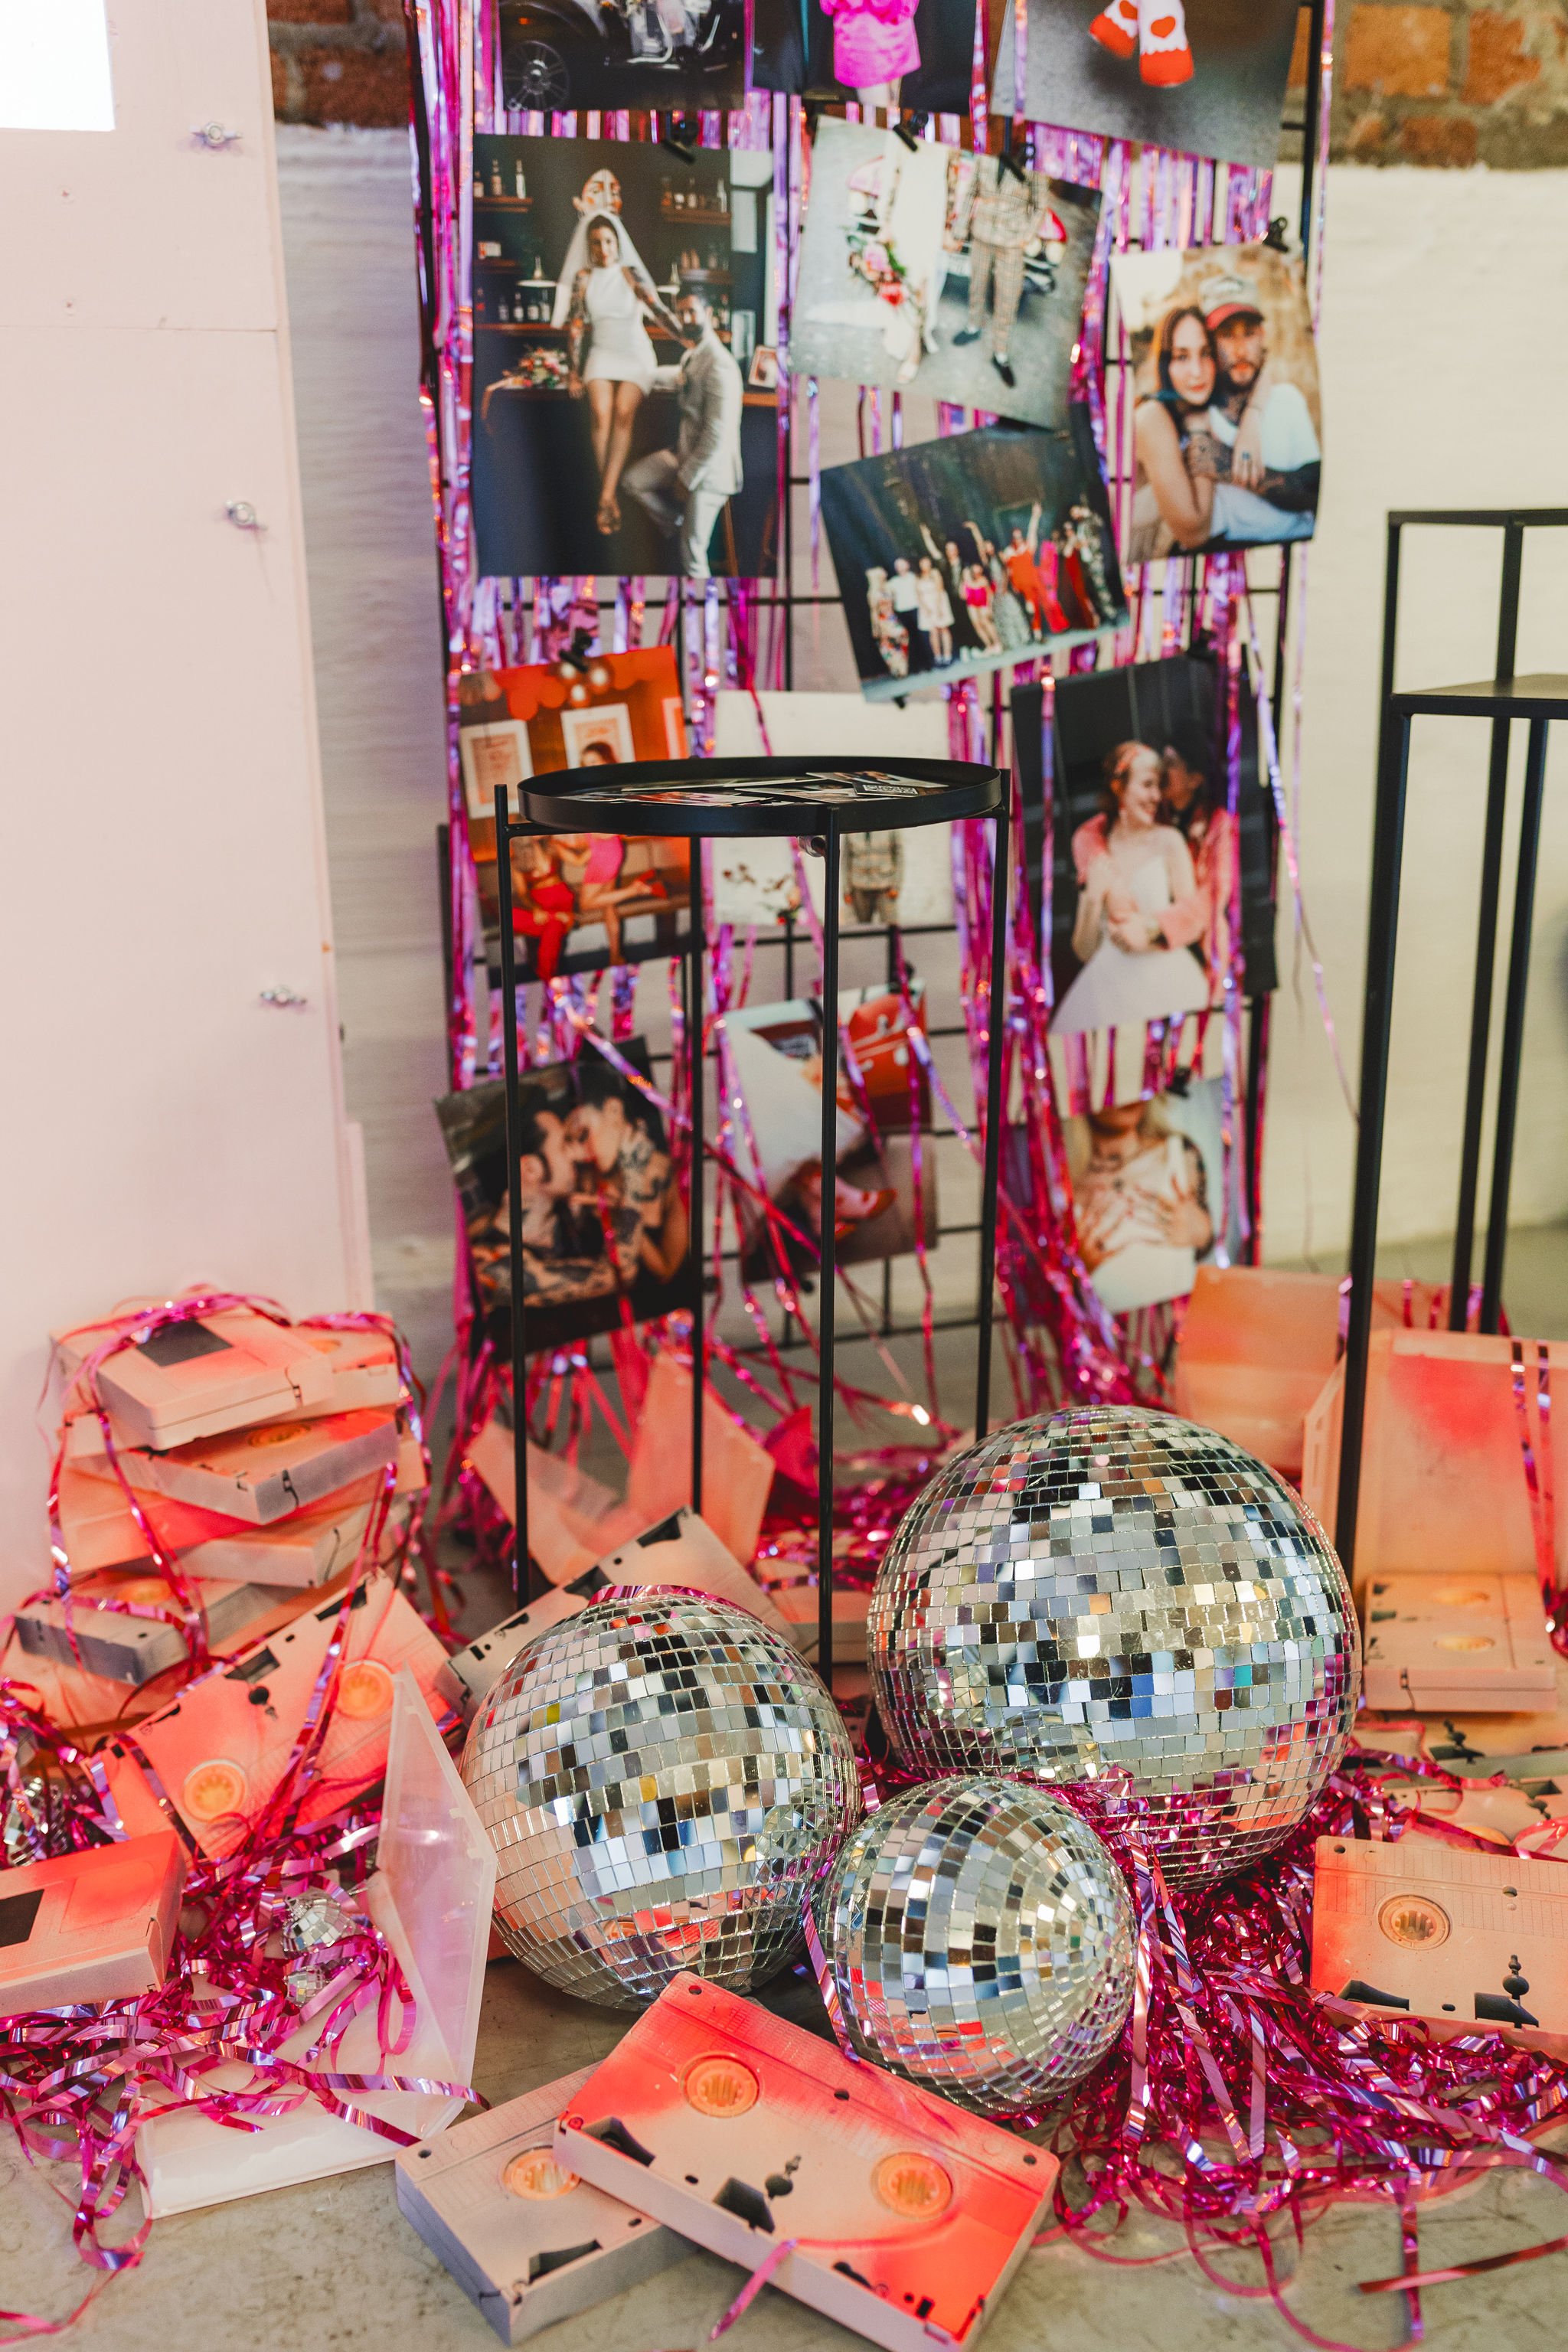  Disco balls and VHS tapes spay painted pink sit amongst pink steamers and photos at Costa Sisters stand at The Un-Wedding Show Bristol. 